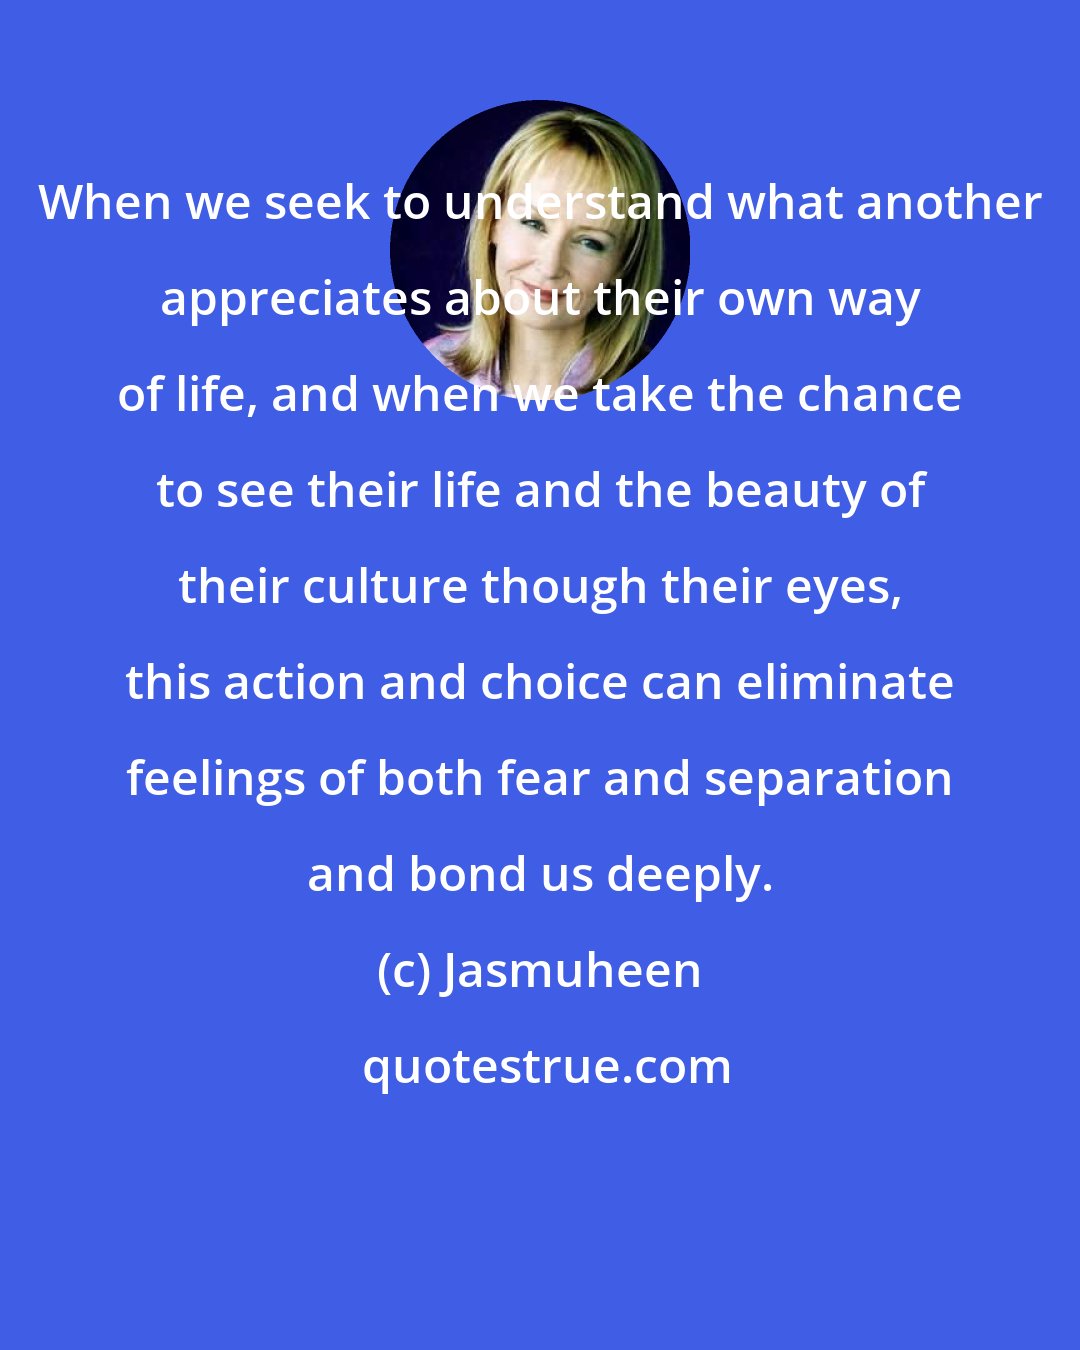 Jasmuheen: When we seek to understand what another appreciates about their own way of life, and when we take the chance to see their life and the beauty of their culture though their eyes, this action and choice can eliminate feelings of both fear and separation and bond us deeply.